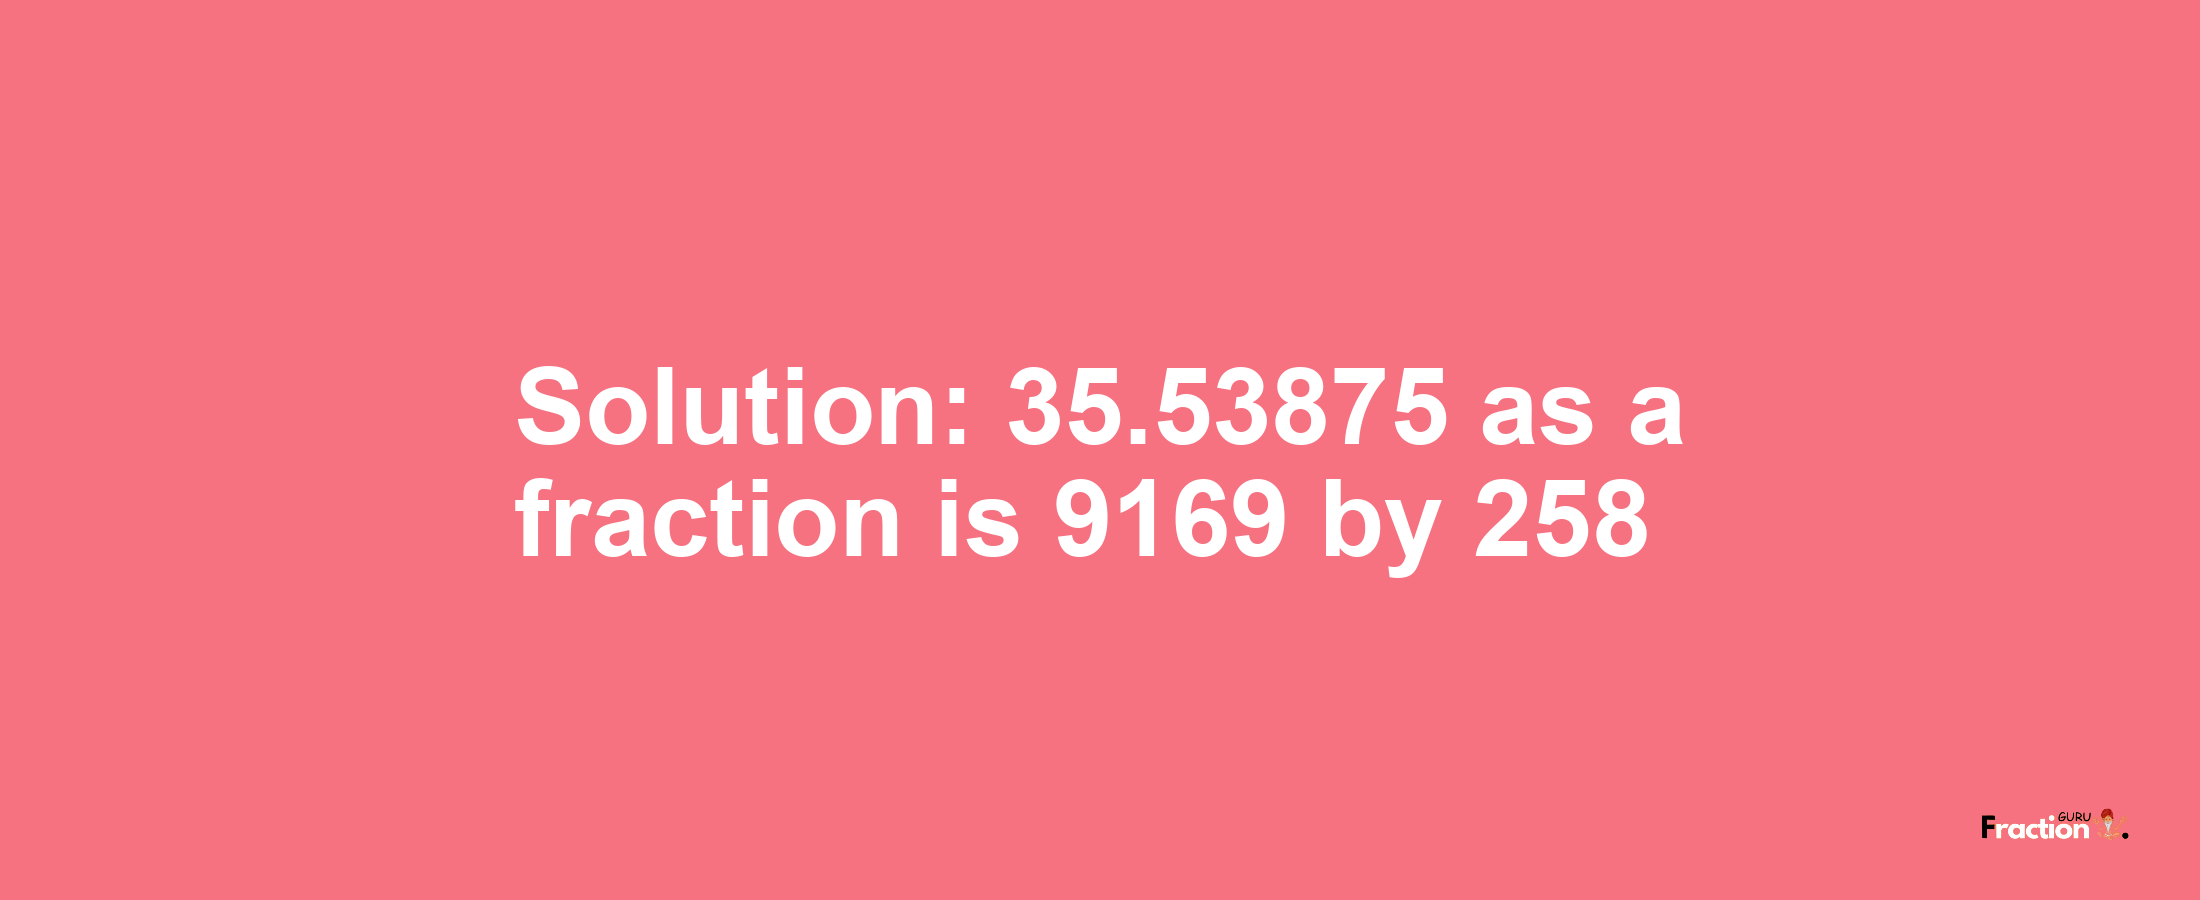 Solution:35.53875 as a fraction is 9169/258